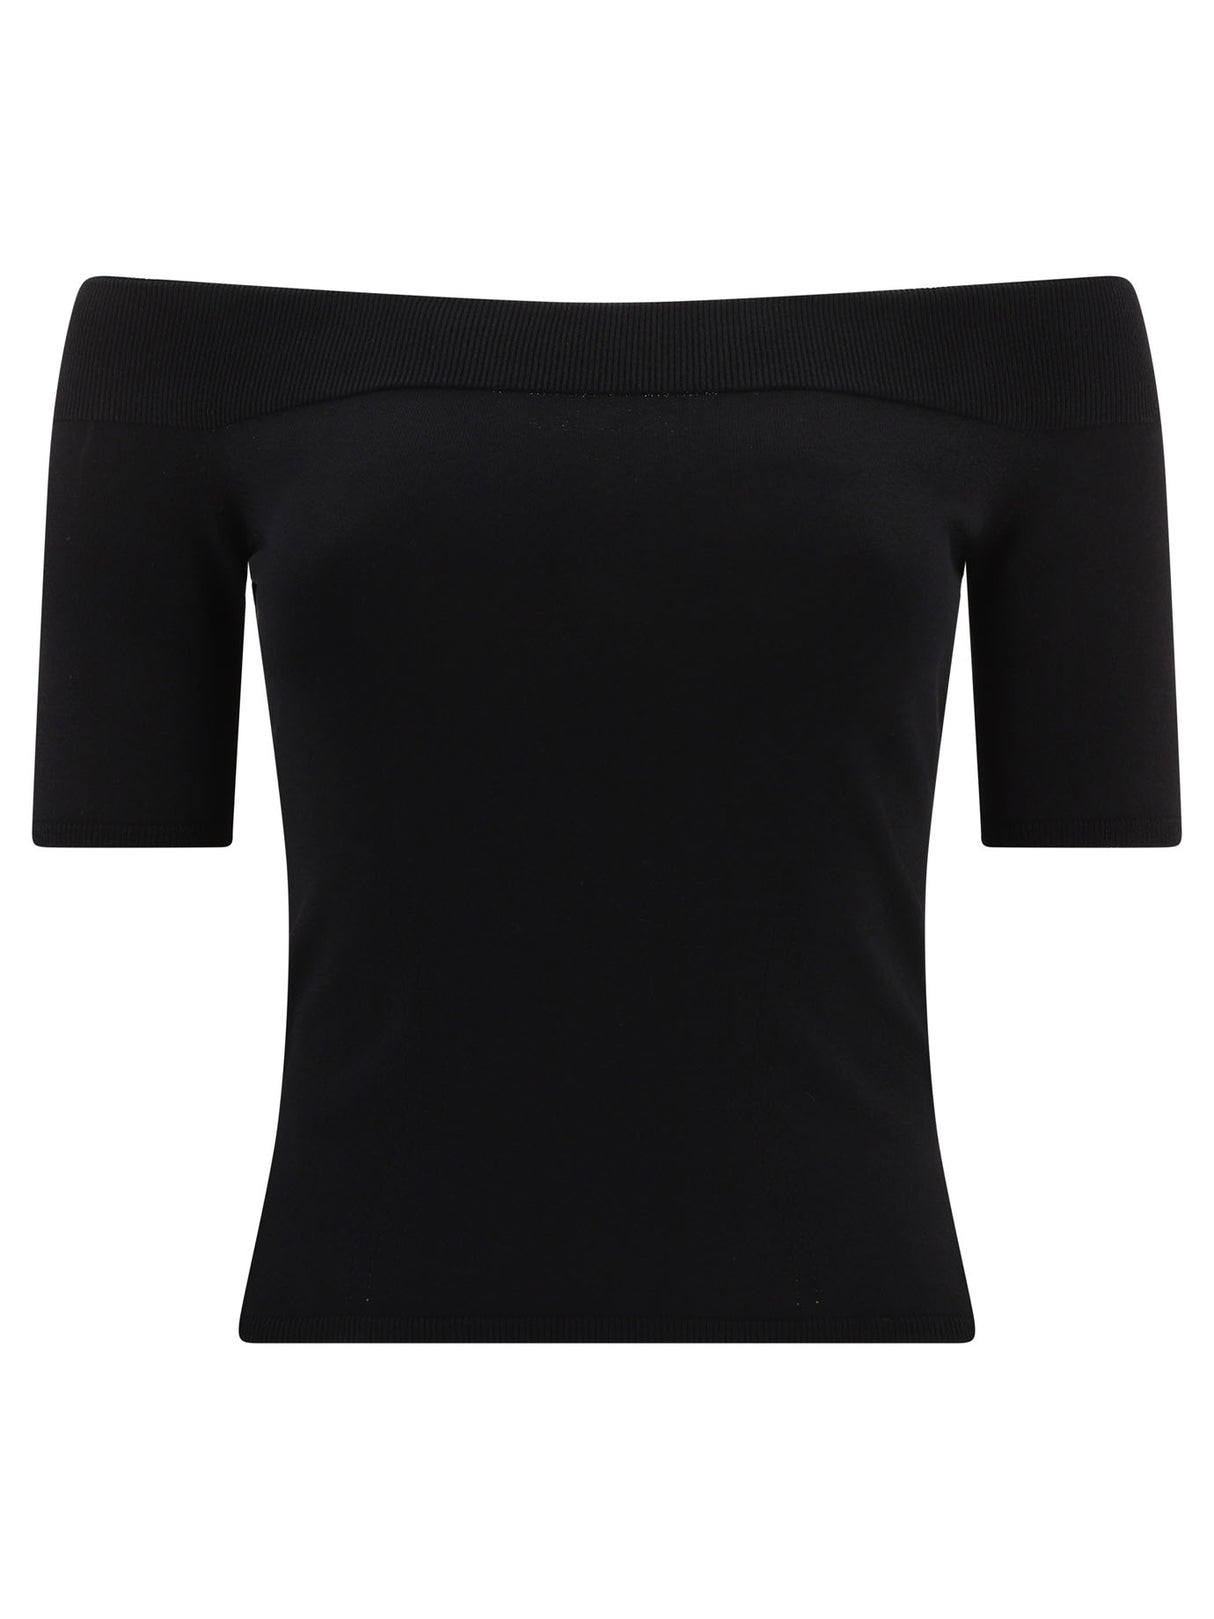 ALEXANDER MCQUEEN Boat-Neck Top for Women in Black - Slim Fit, Ribbed Collar, Hem and Cuffs